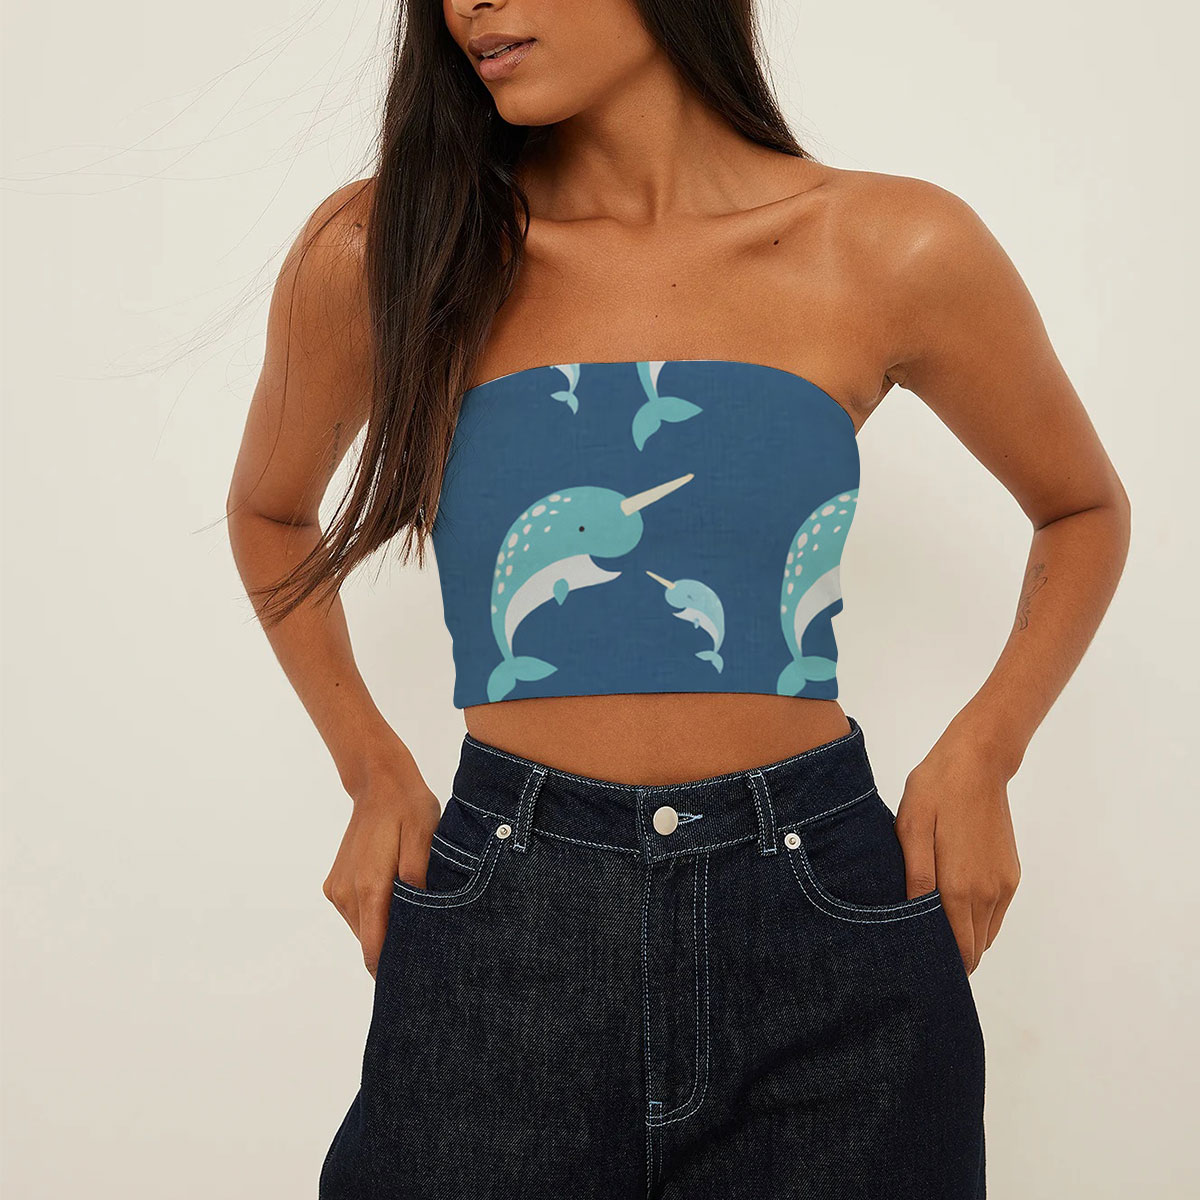 Big And Small Narwhal Tube Top